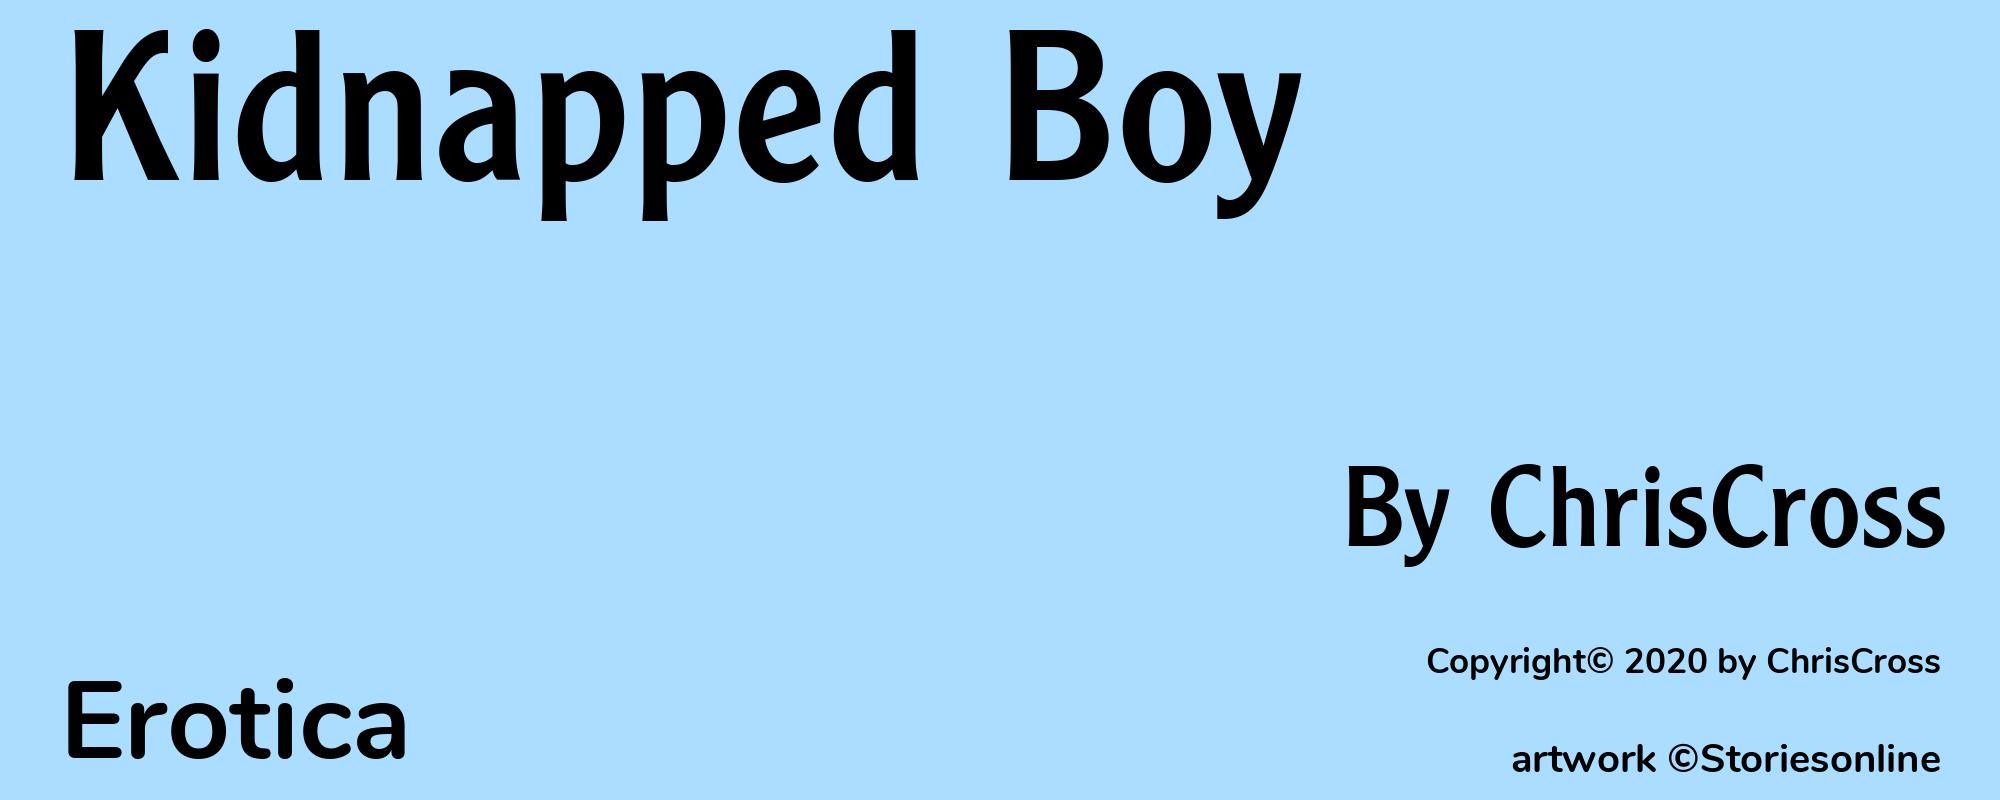 Kidnapped Boy - Cover